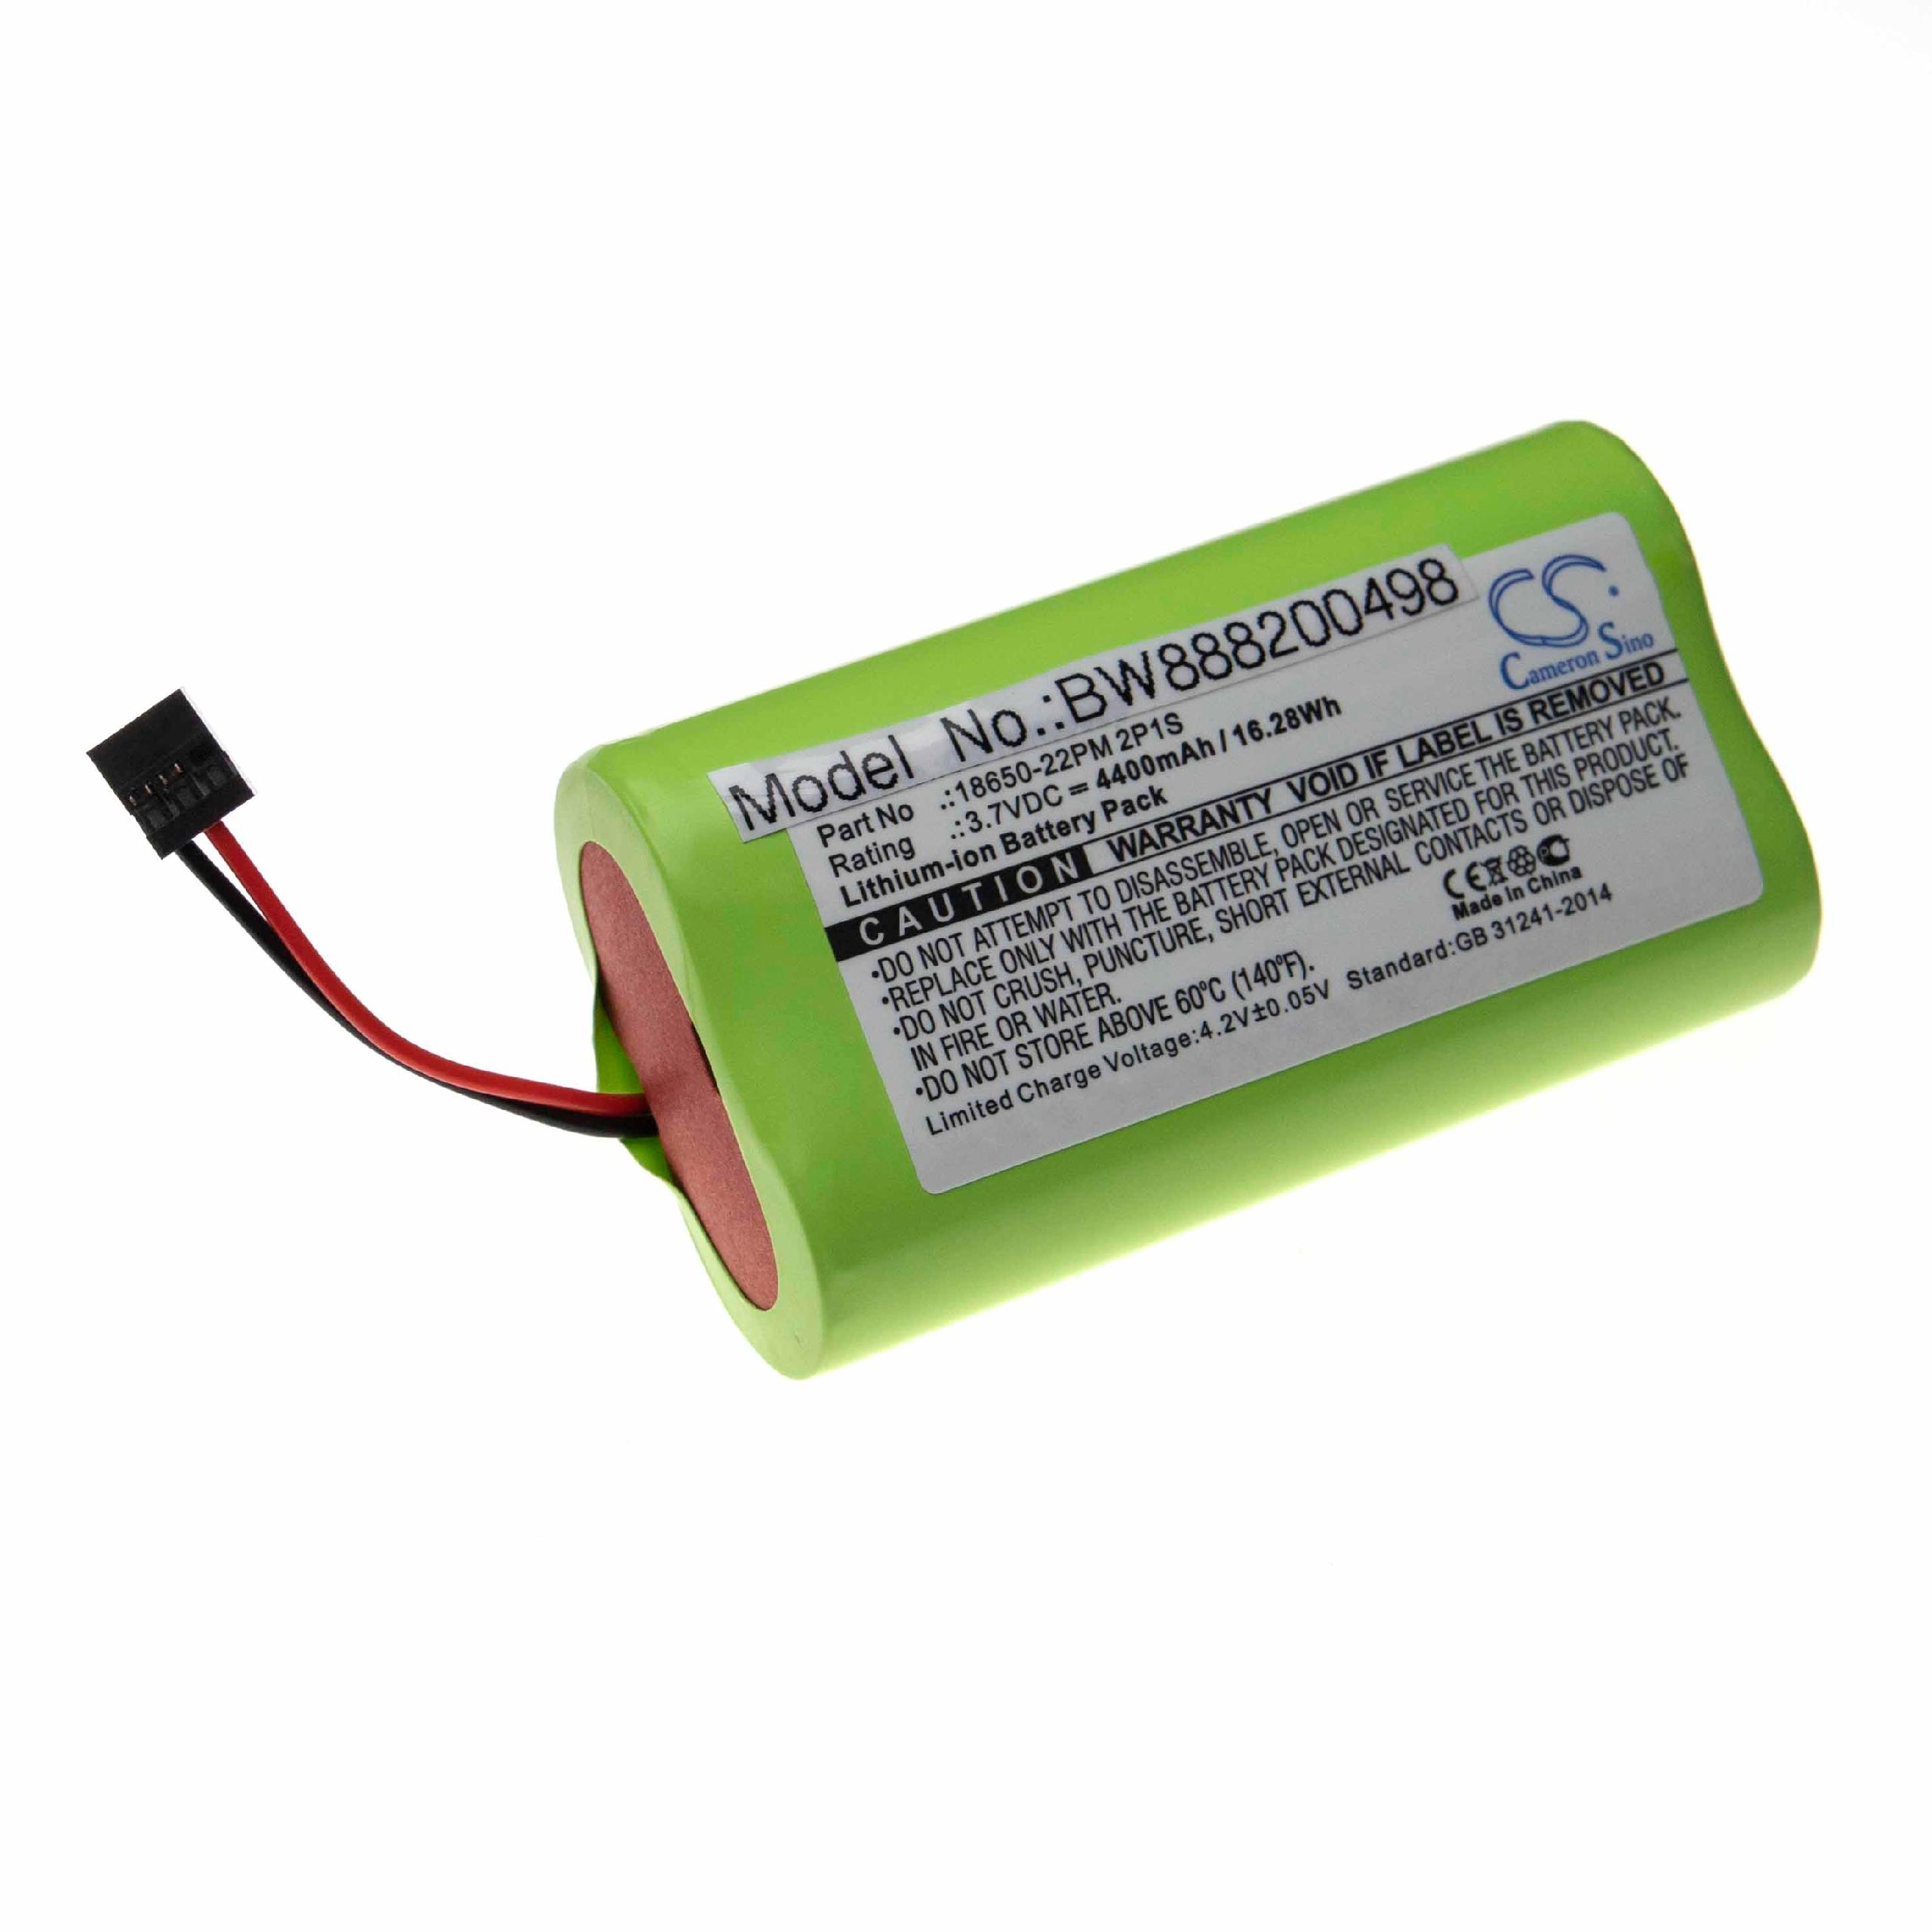 Torch - Battery Replacement for Trelock 18650-22PM 2P1S - 4400mAh 3.7V Li-Ion